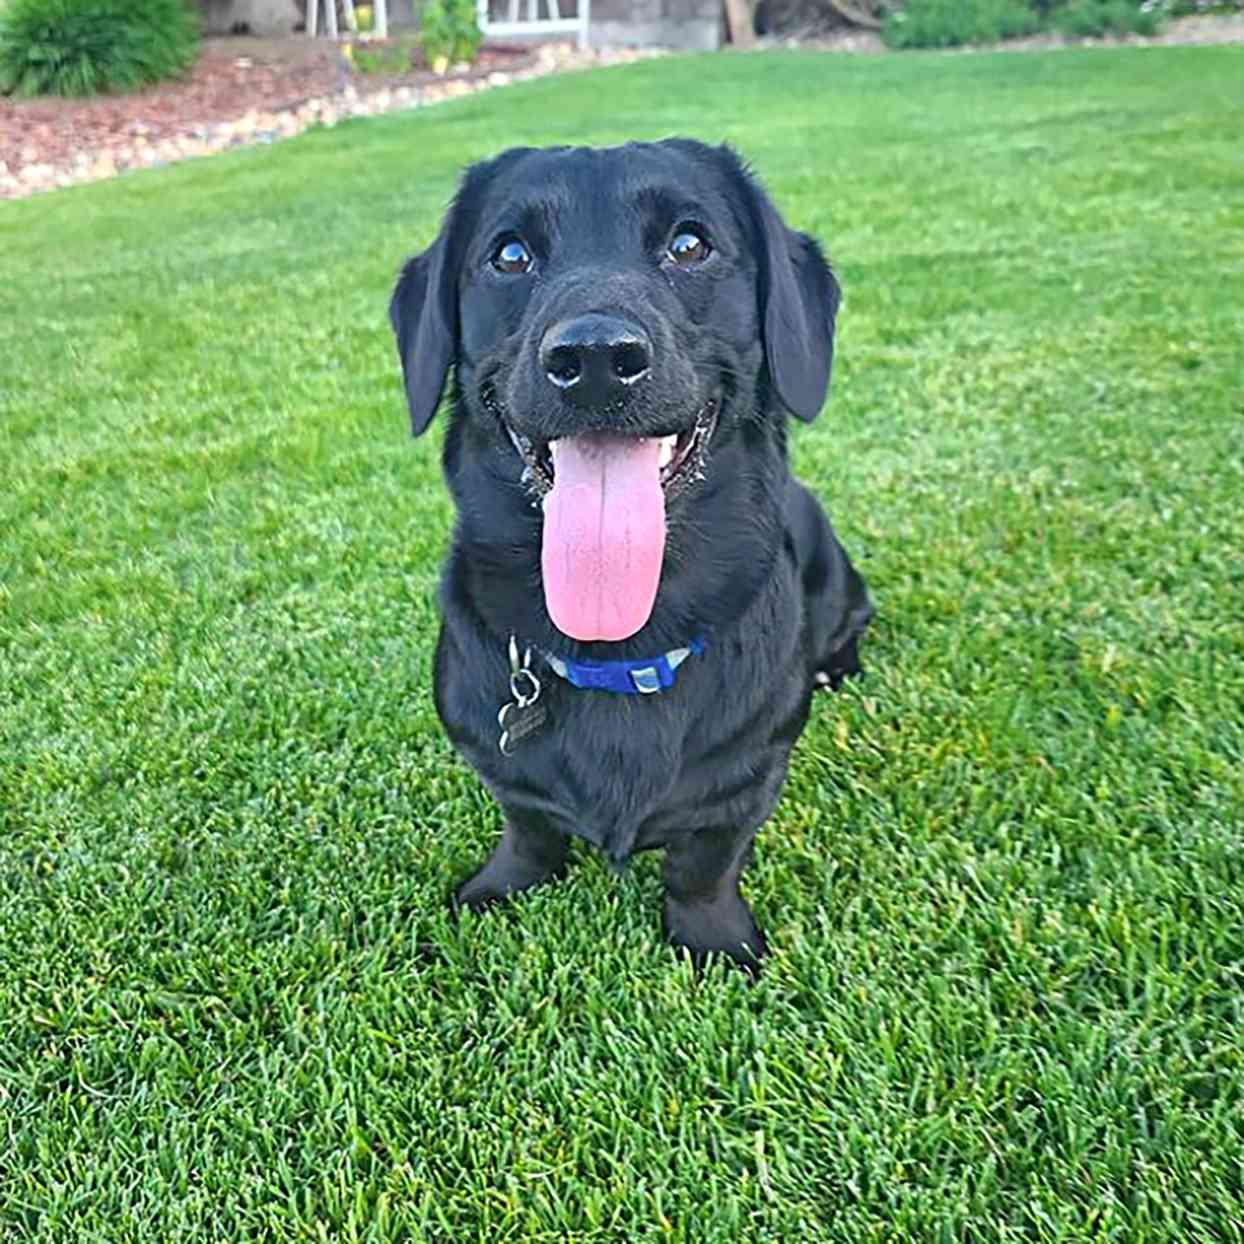 black labrador retriever dachshund mix standing in grass with his tongue out